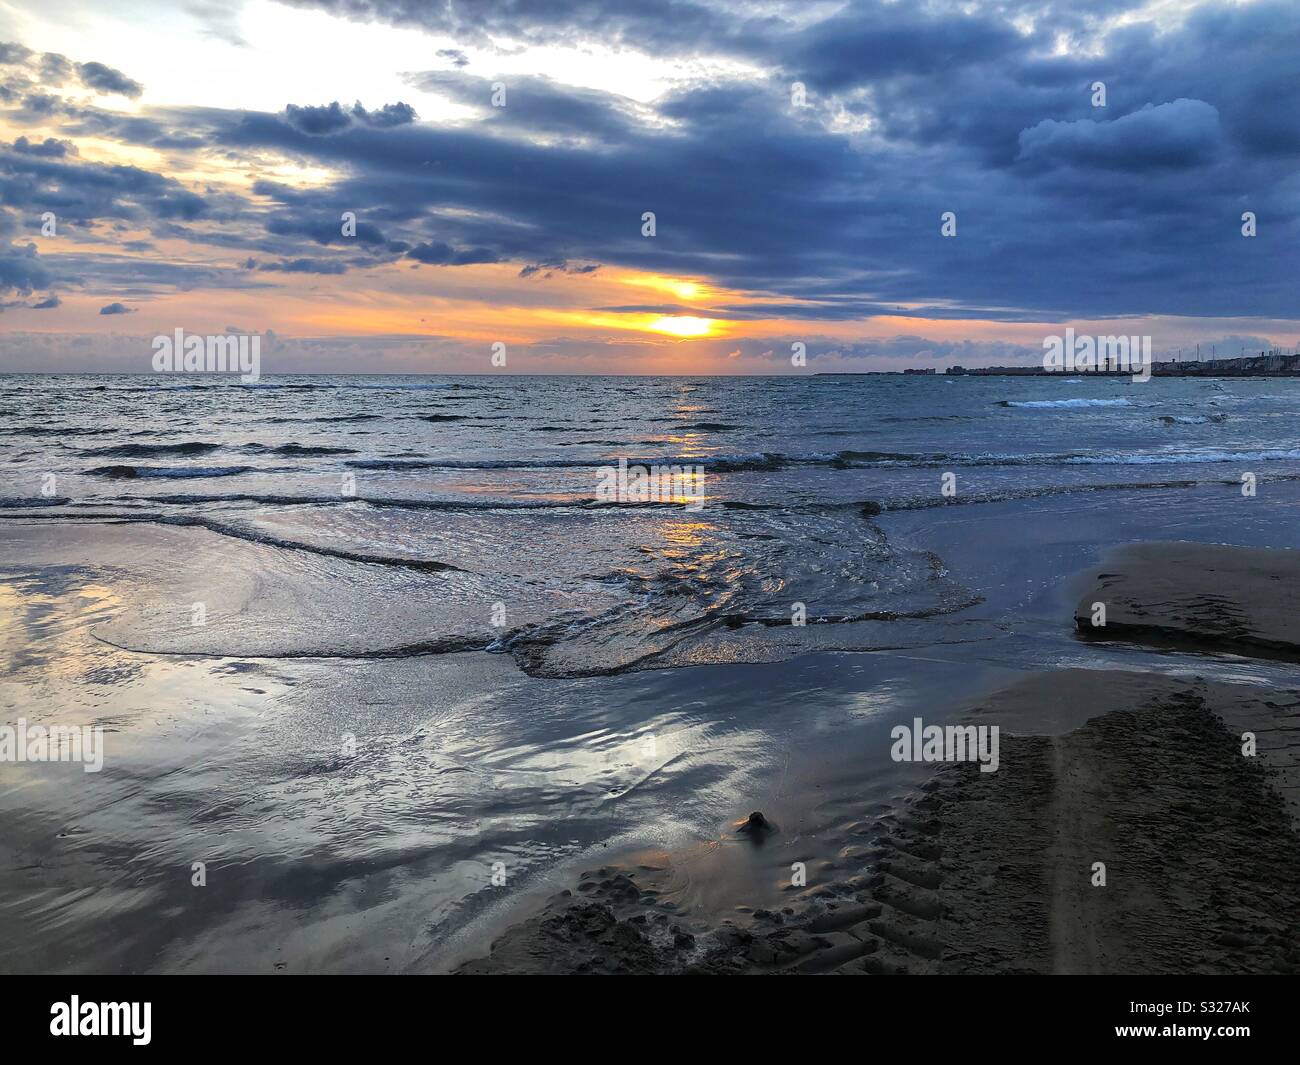 Sunset at the beach in Italy Stock Photo